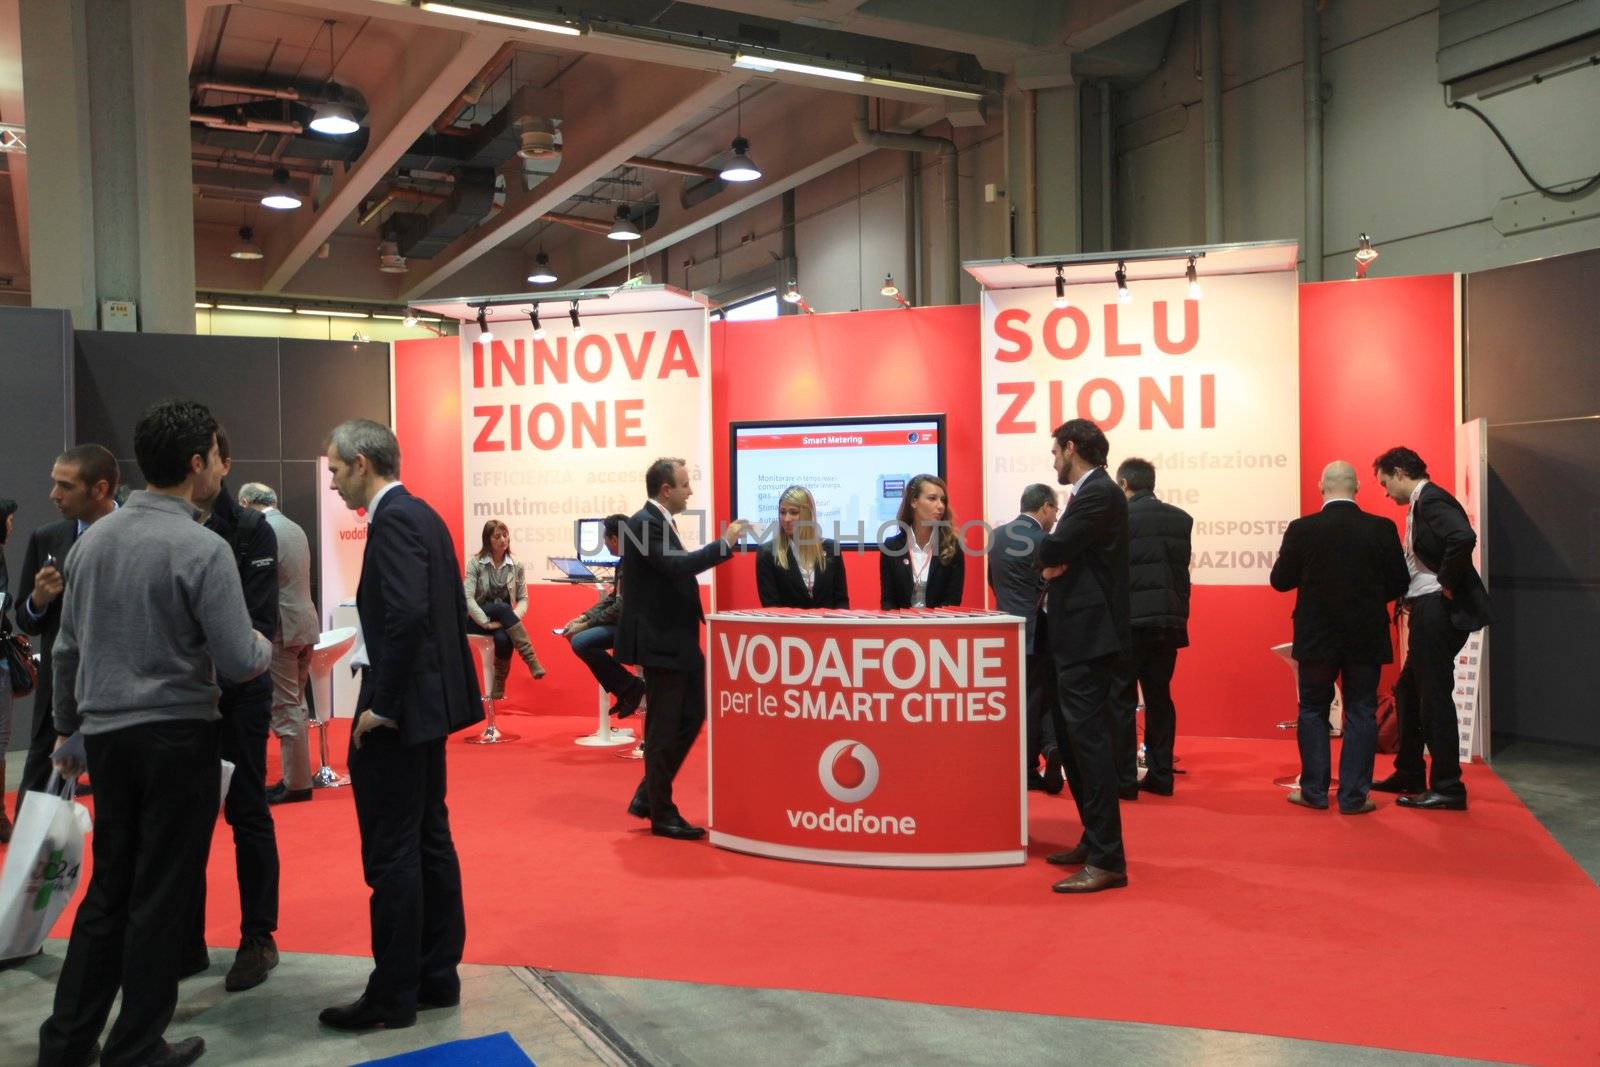 MILAN, ITALY - OCTOBER 17: People visit Vodafone technologies products exhibition area at SMAU, international fair of business intelligence and information technology October 17, 2012 in Milan, Italy.